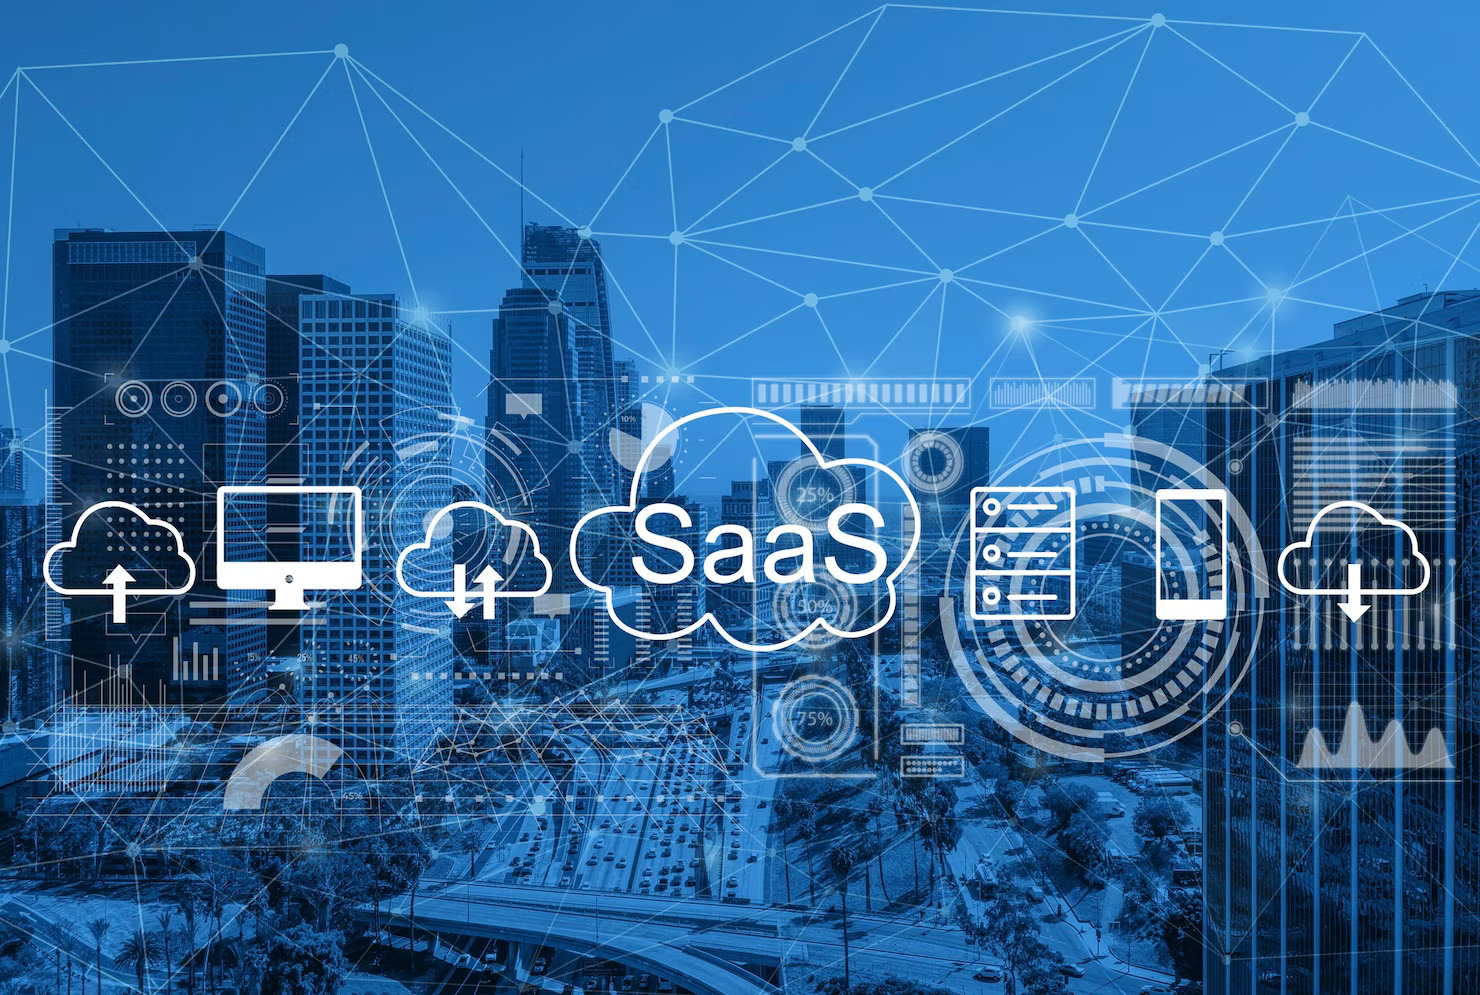 Saas company collage with different icons on a city skyline background